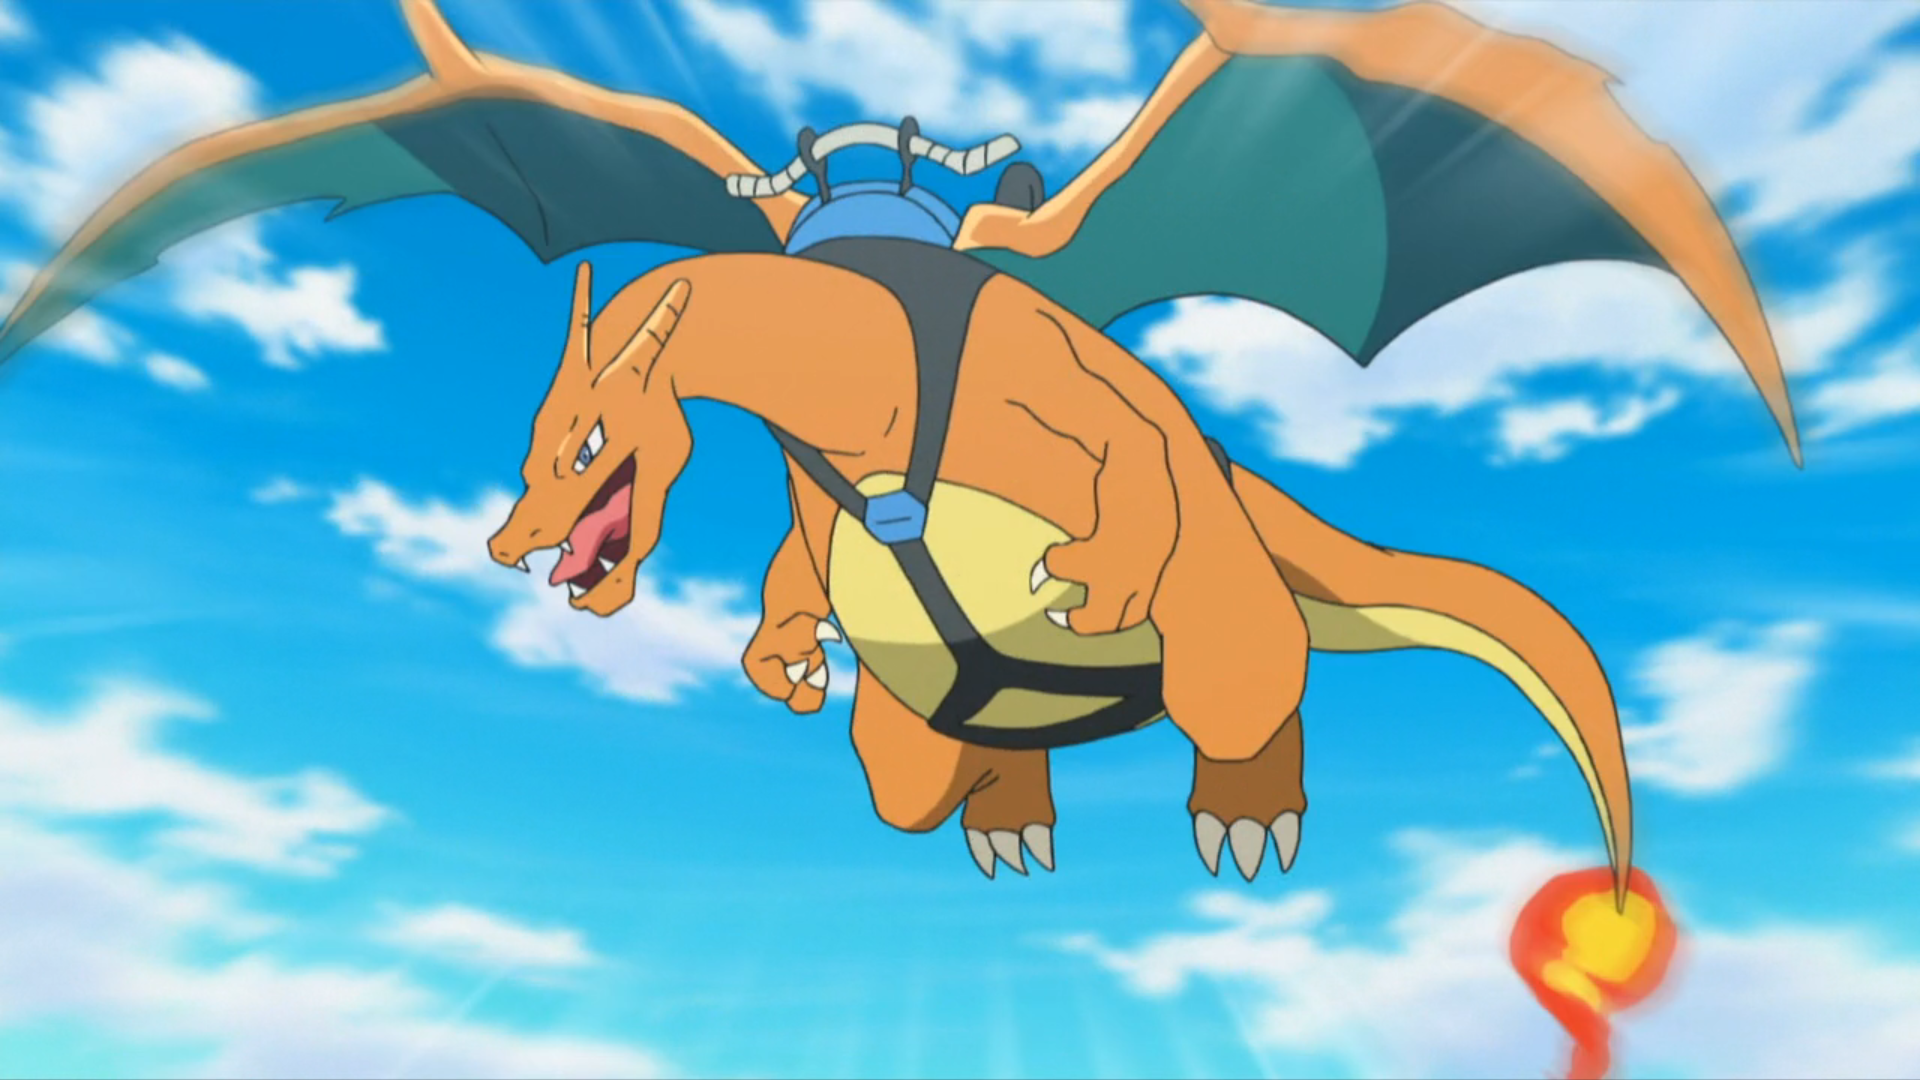 Download Funny Anime Pokemon Catching Charizard Wallpaper | Wallpapers.com